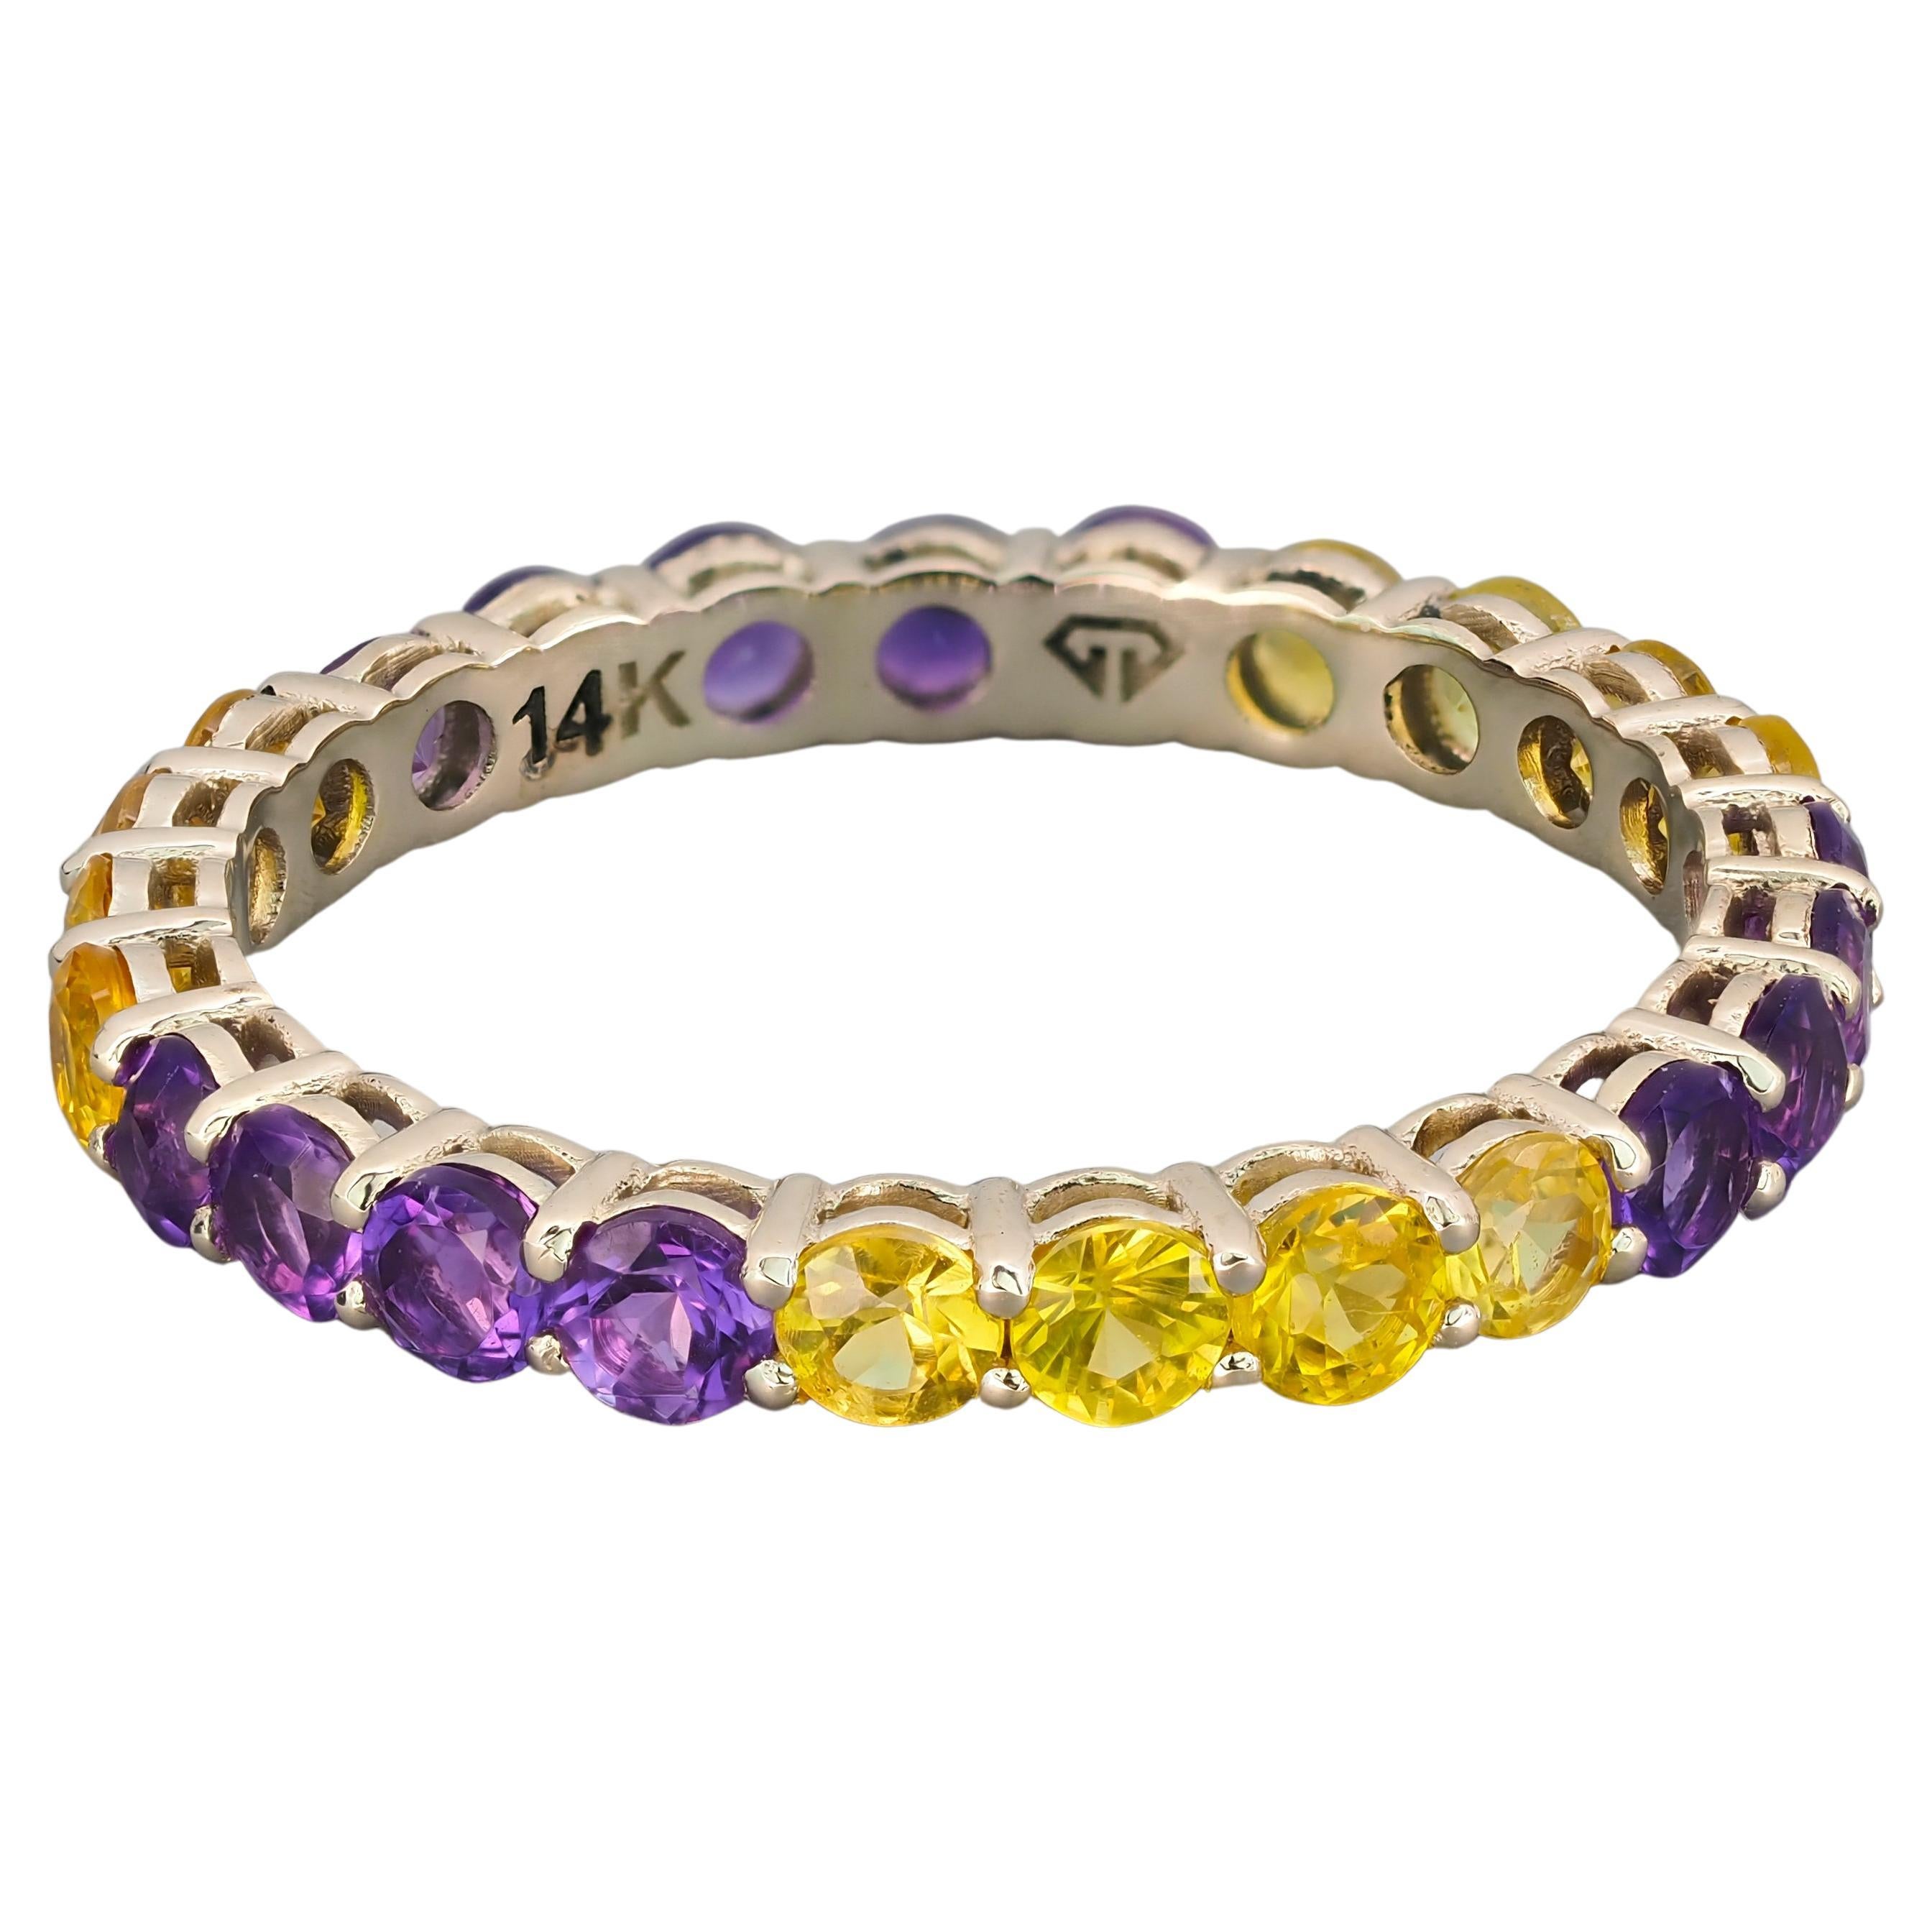 For Sale:  14k Gold Eternity Ring with Sapphires and Amethysts